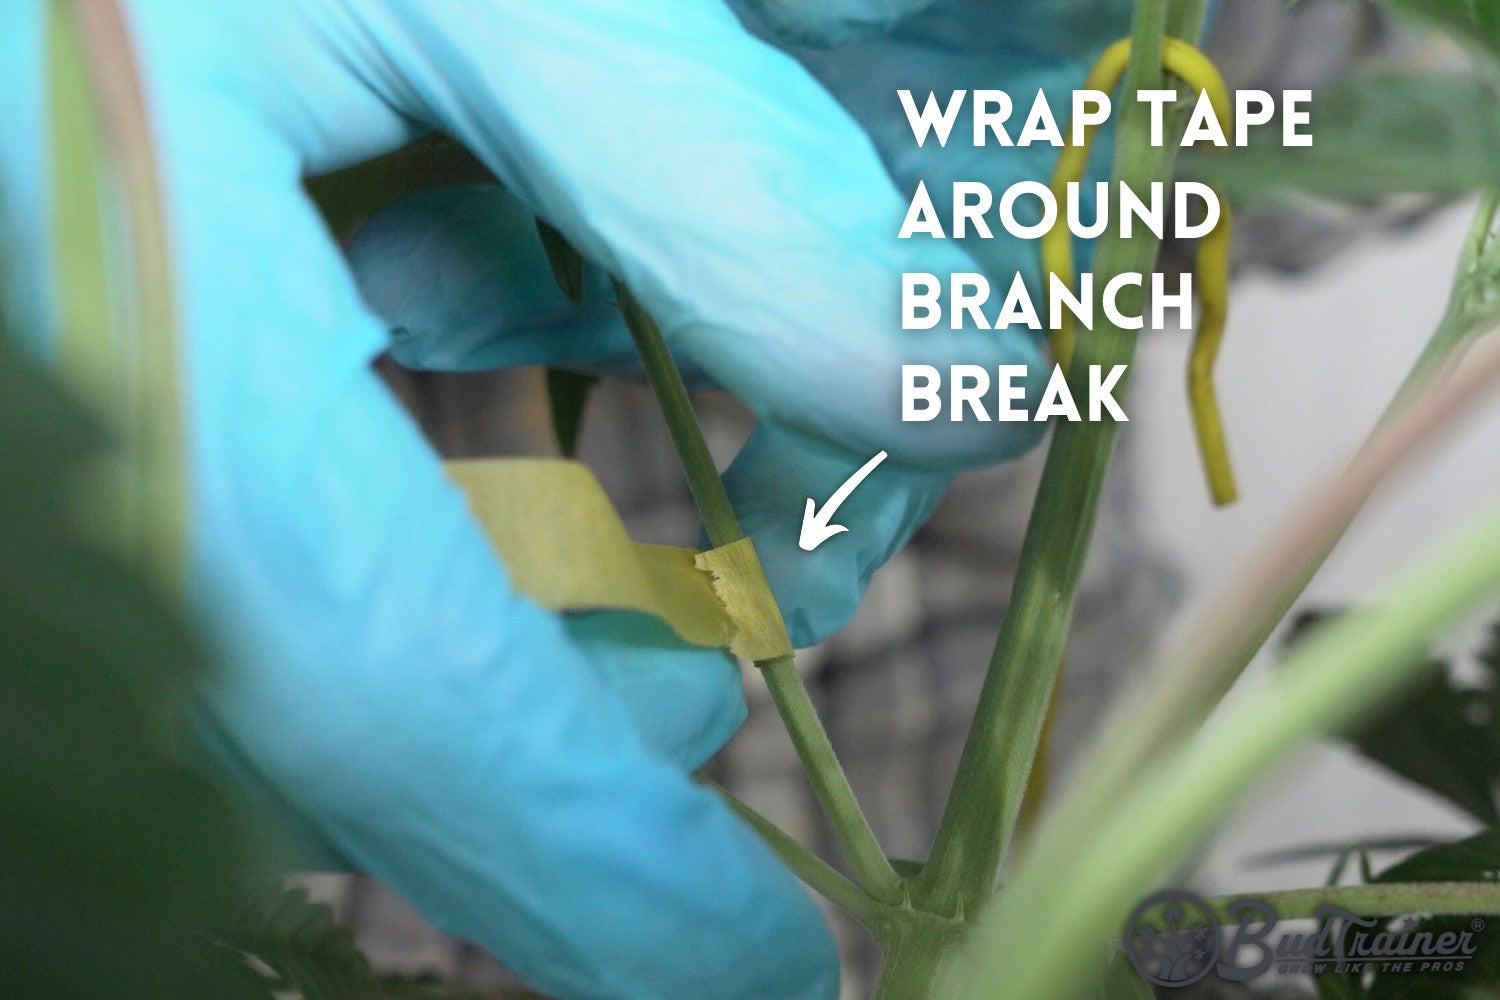 Person wearing blue gloves wrapping tape around a cannabis plant branch break, with the text “Wrap Tape Around Branch Break” and an arrow pointing to the taped area, and the BudTrainer logo in the bottom right corner.